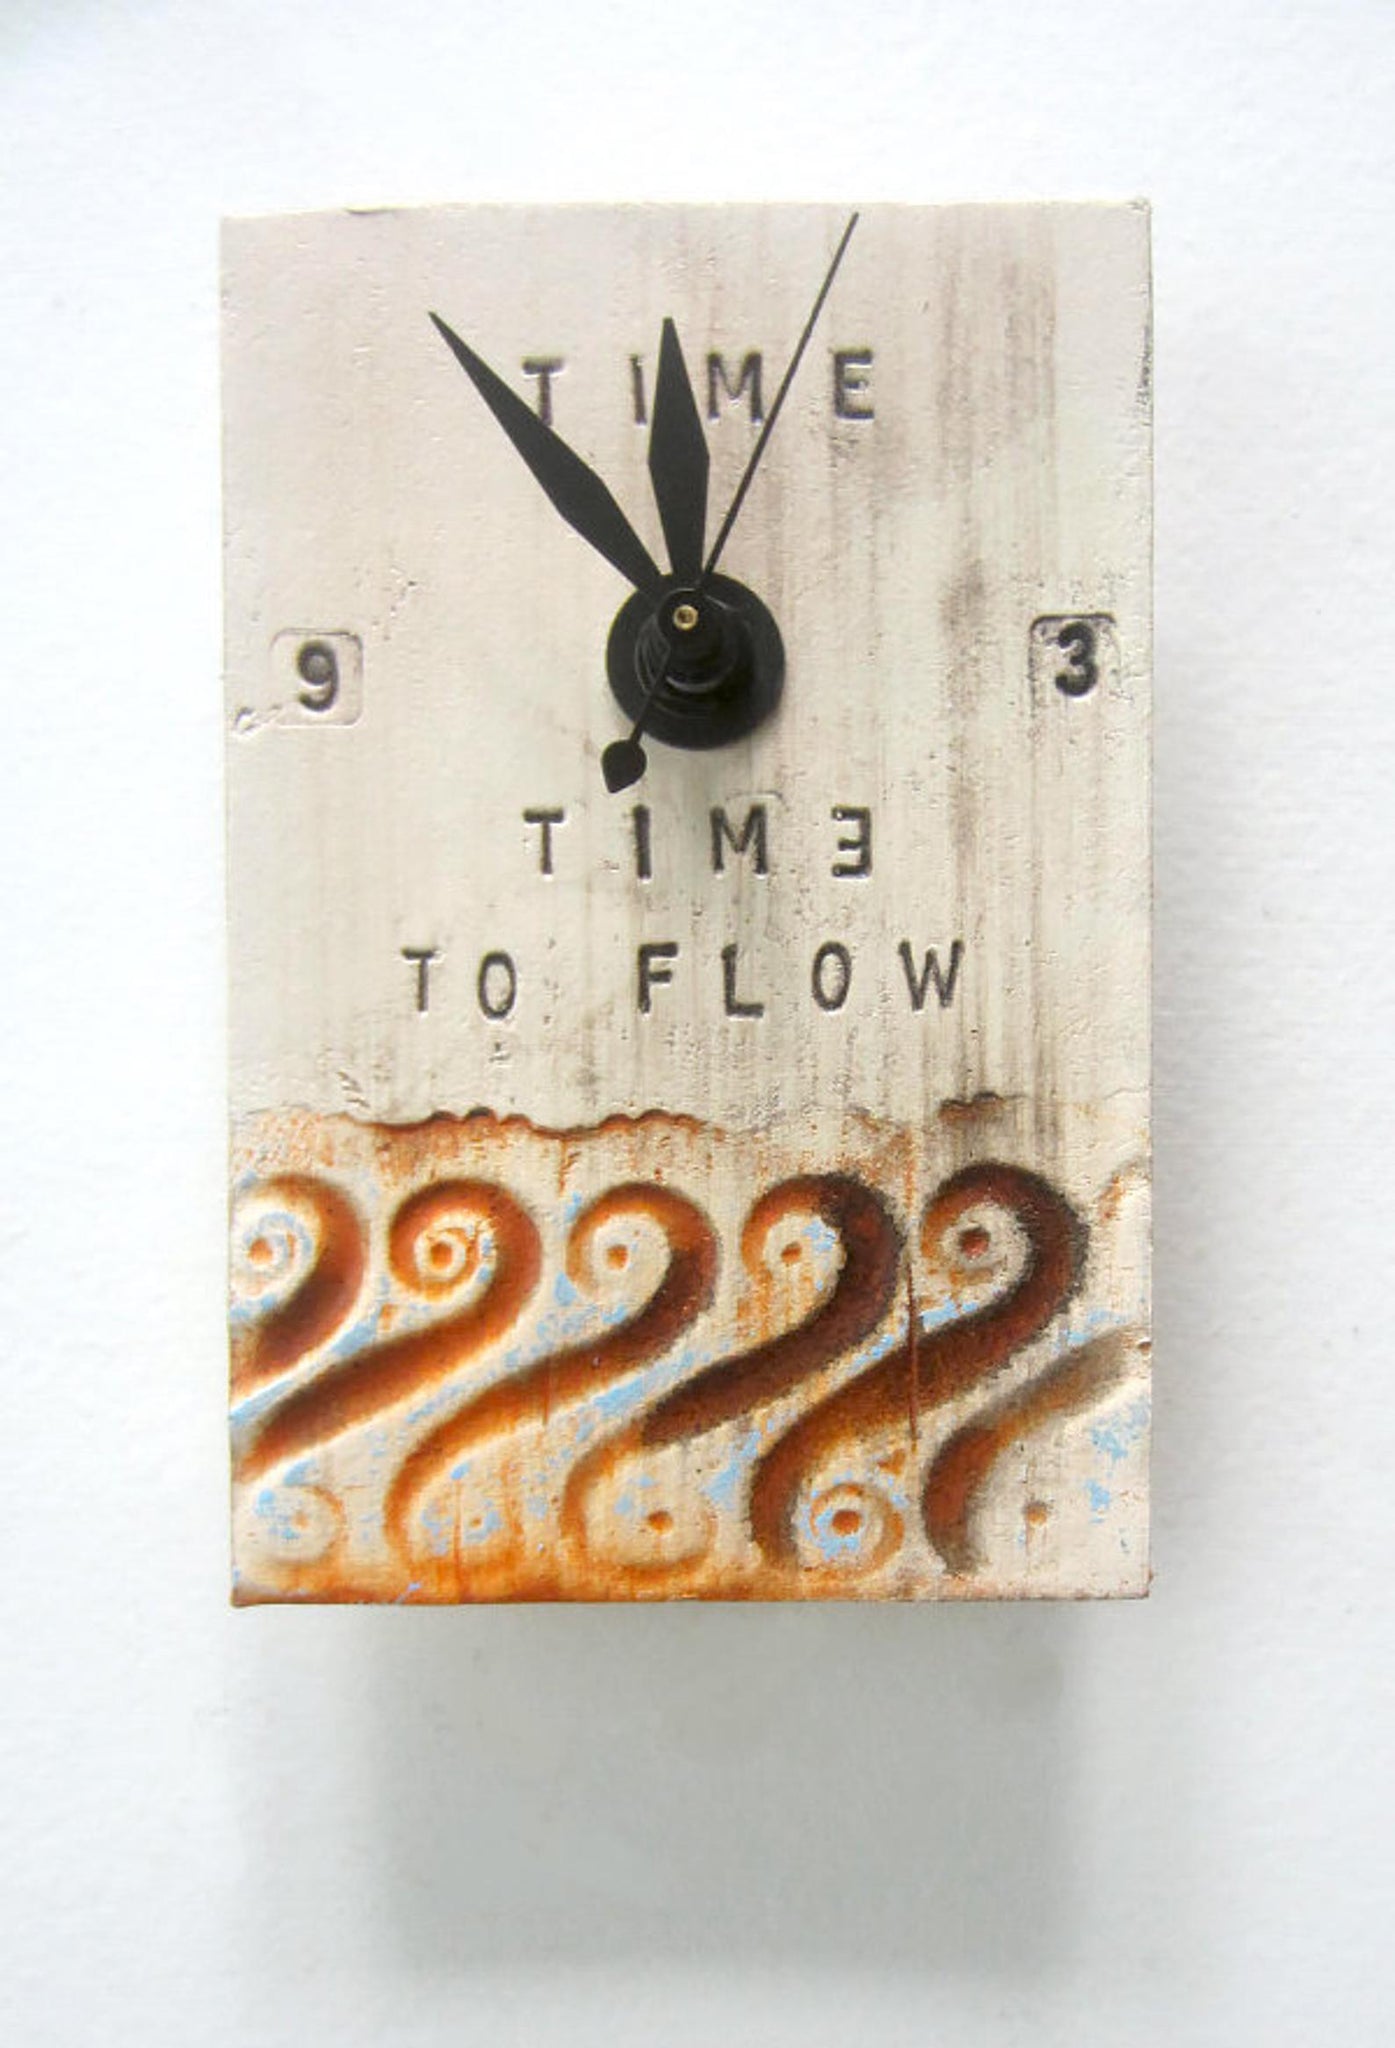 TiqueTile "Time To Flow" 6 x 4 inch  clock